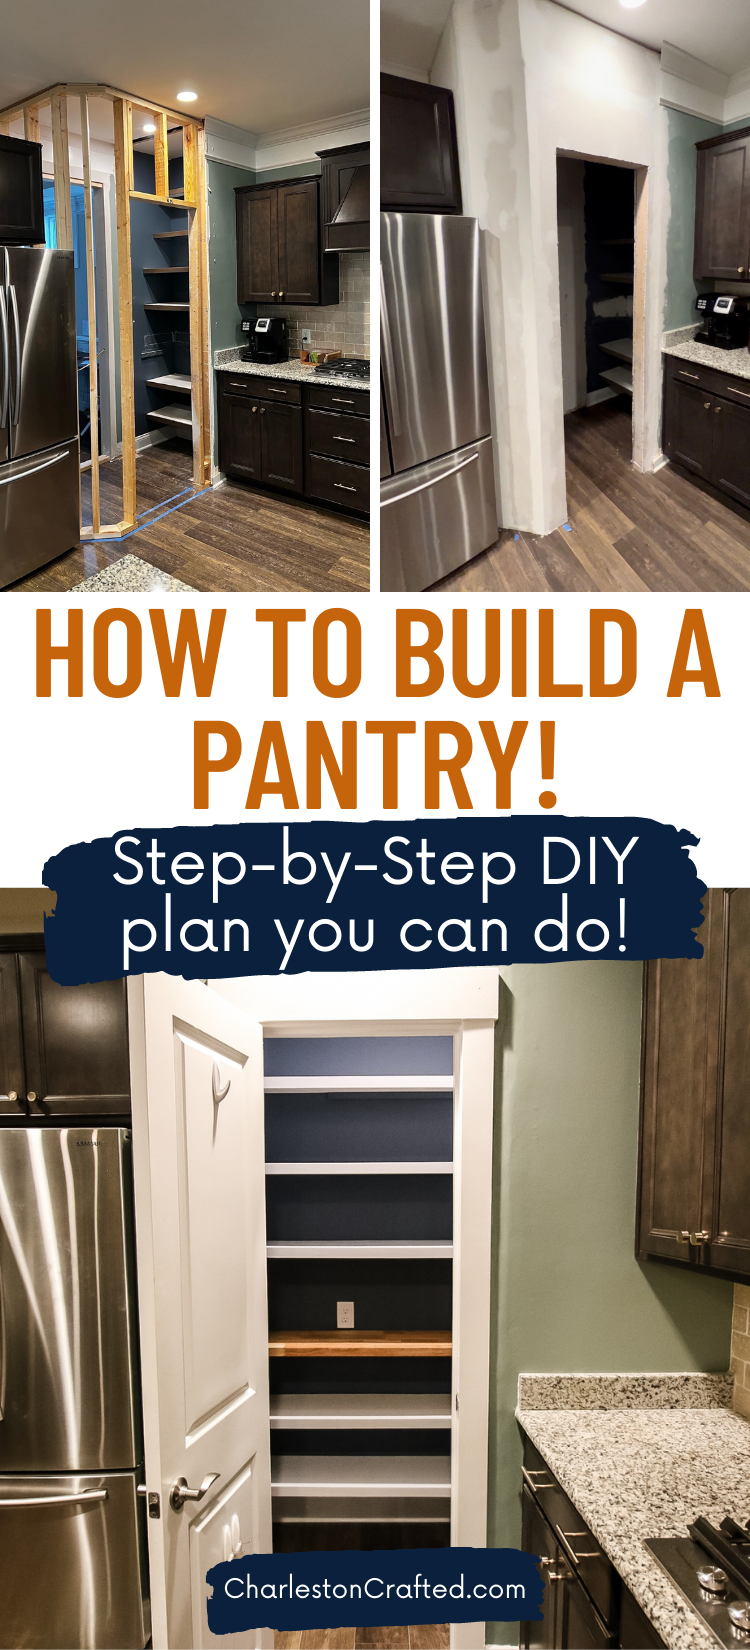 https://www.charlestoncrafted.com/wp-content/uploads/2023/01/how-to-build-a-pantry-pin-image.png